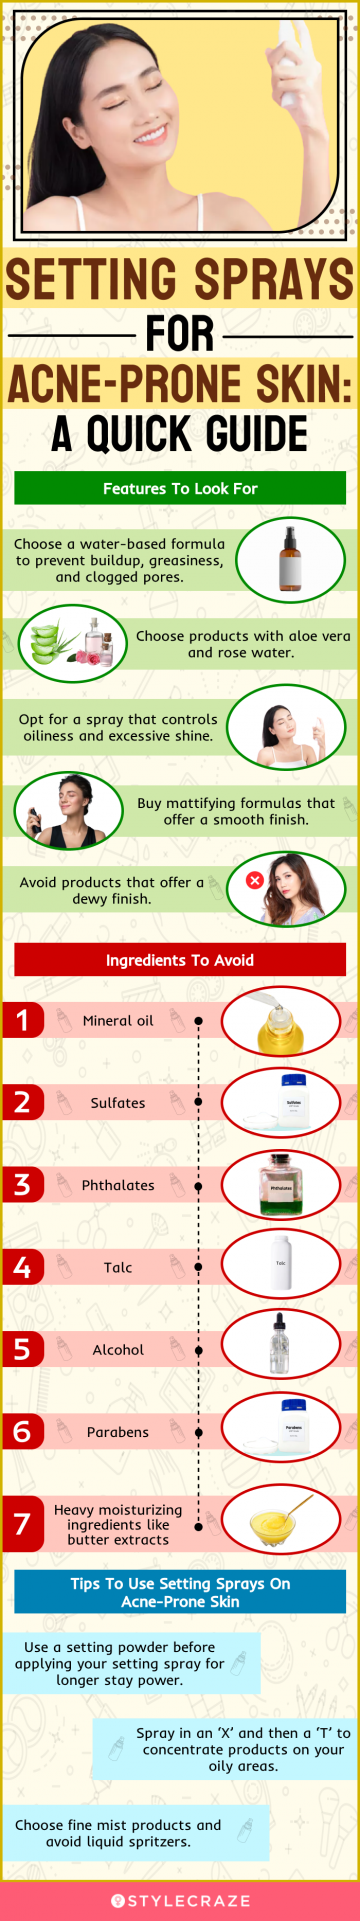 Setting Spray For Acne-Prone Skin: A Quick Guide (infographic)